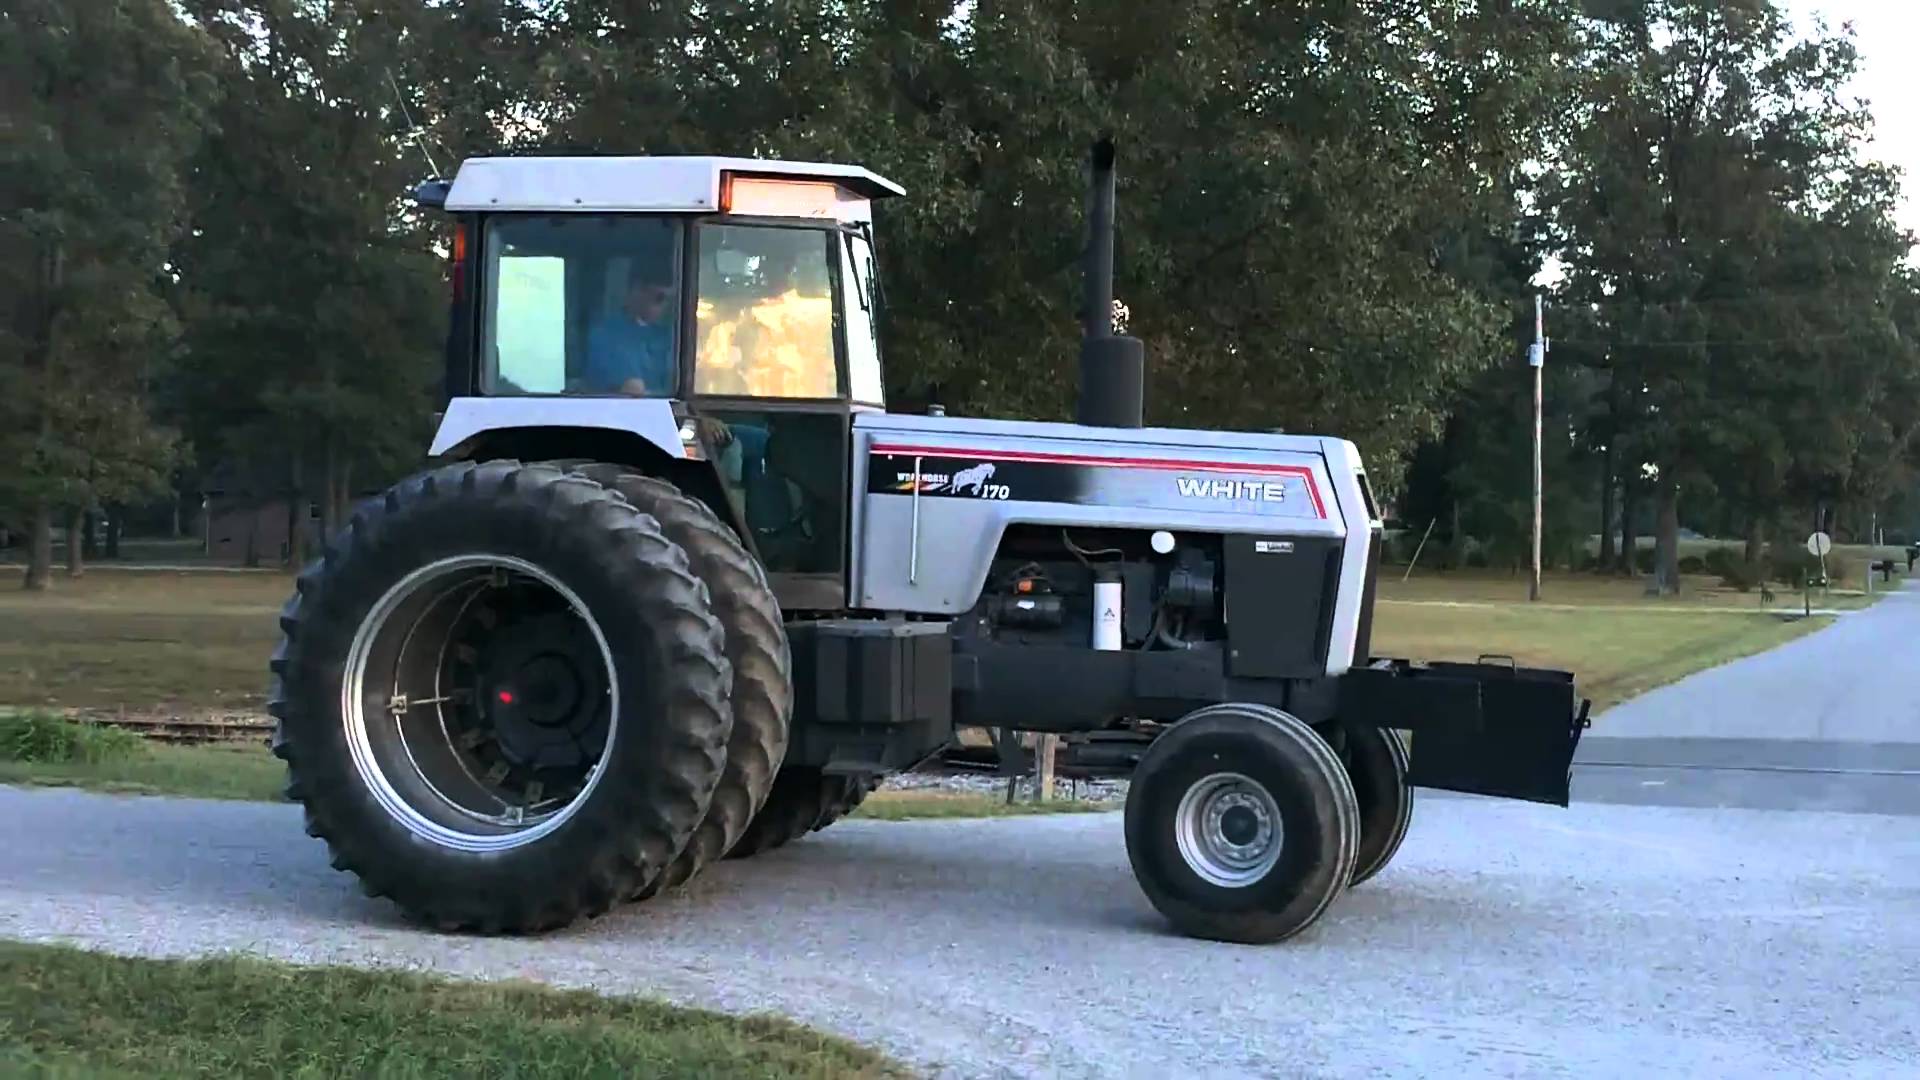 White 170 Workhorse Tractor - YouTube